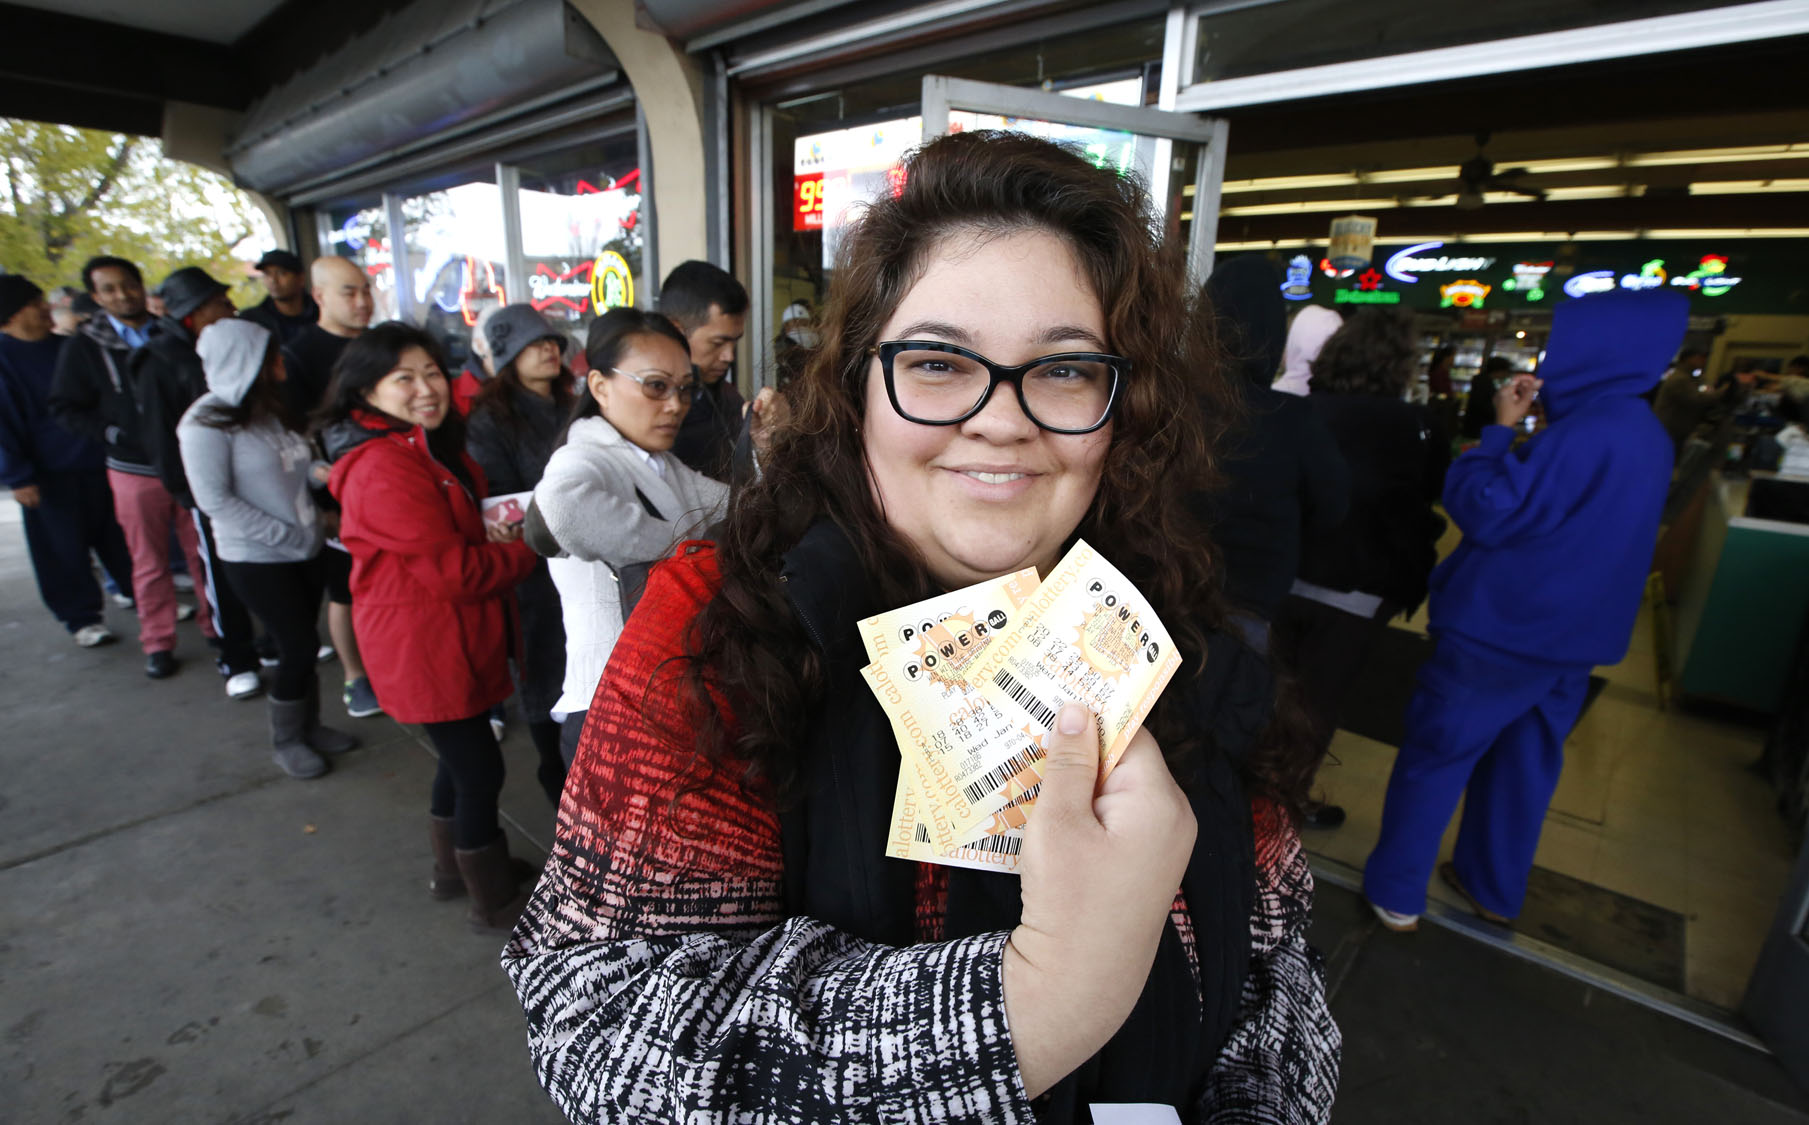 Laura Woodward displays the Powerball lottery tickets she bought for her office pool at Lichine's Liquor store, Wednesday, Jan. 13, 2016, in Sacramento, Calif. The Powerball jackpot for Wednesday night's drawing to be over $1 billion, the largest lottery jackpot in the world.(AP Photo/Rich Pedroncelli) ORG XMIT: CARP106